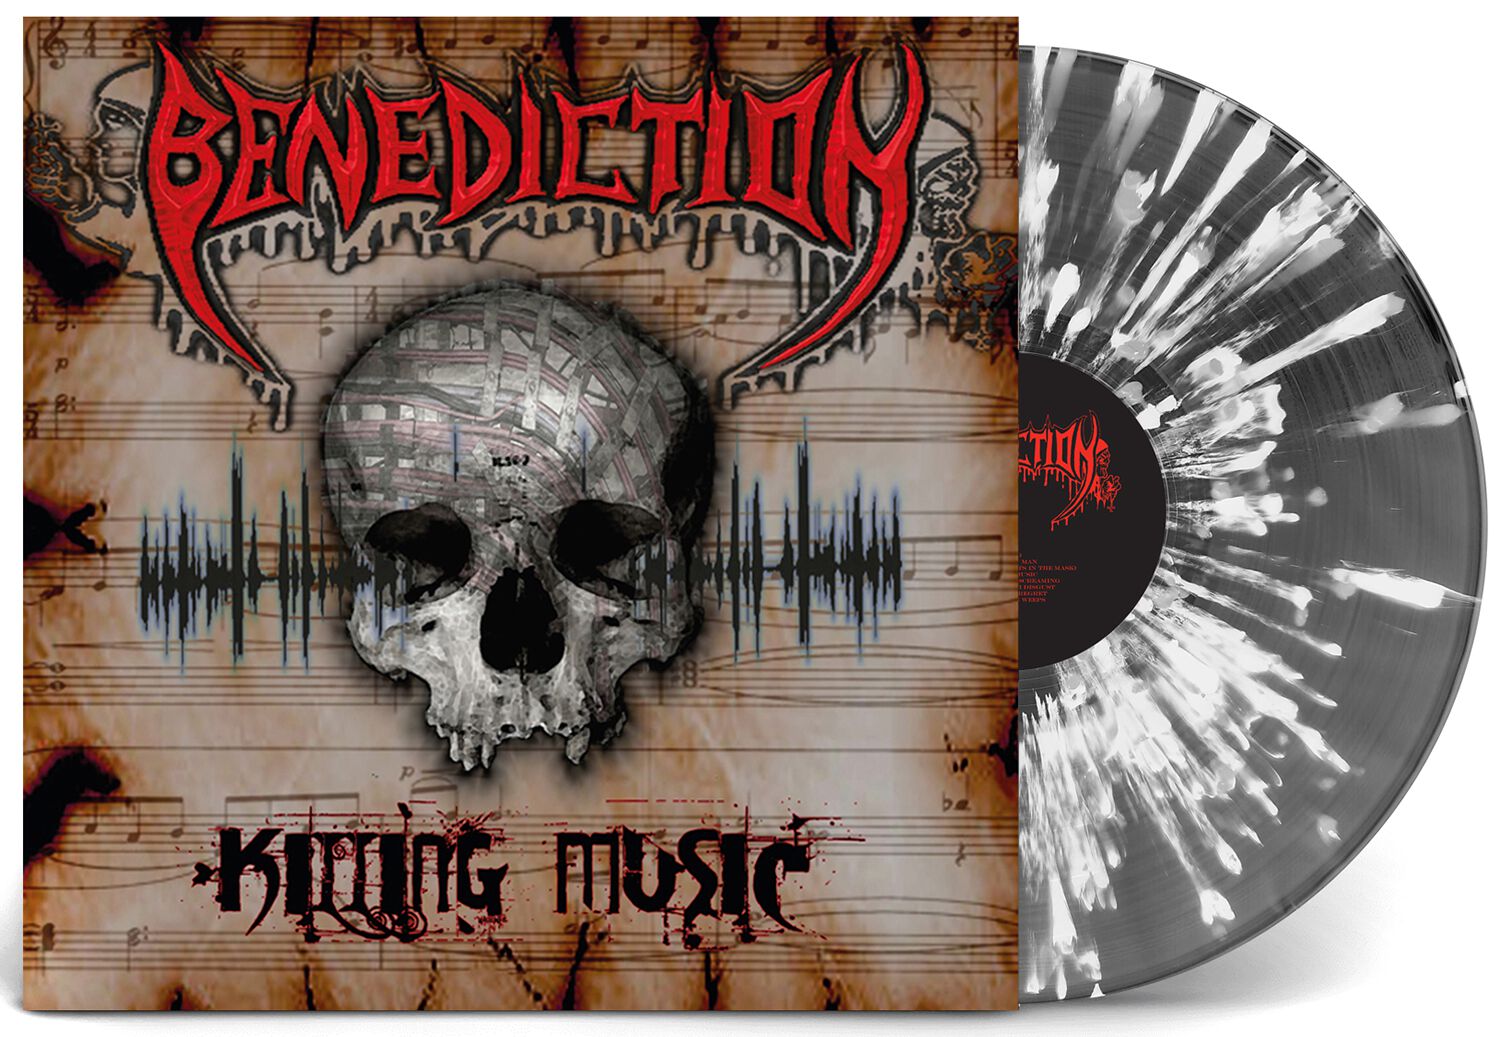 Killing music von Benediction - LP (Coloured, Deluxe Edition, Limited Edition, Picture, Standard)